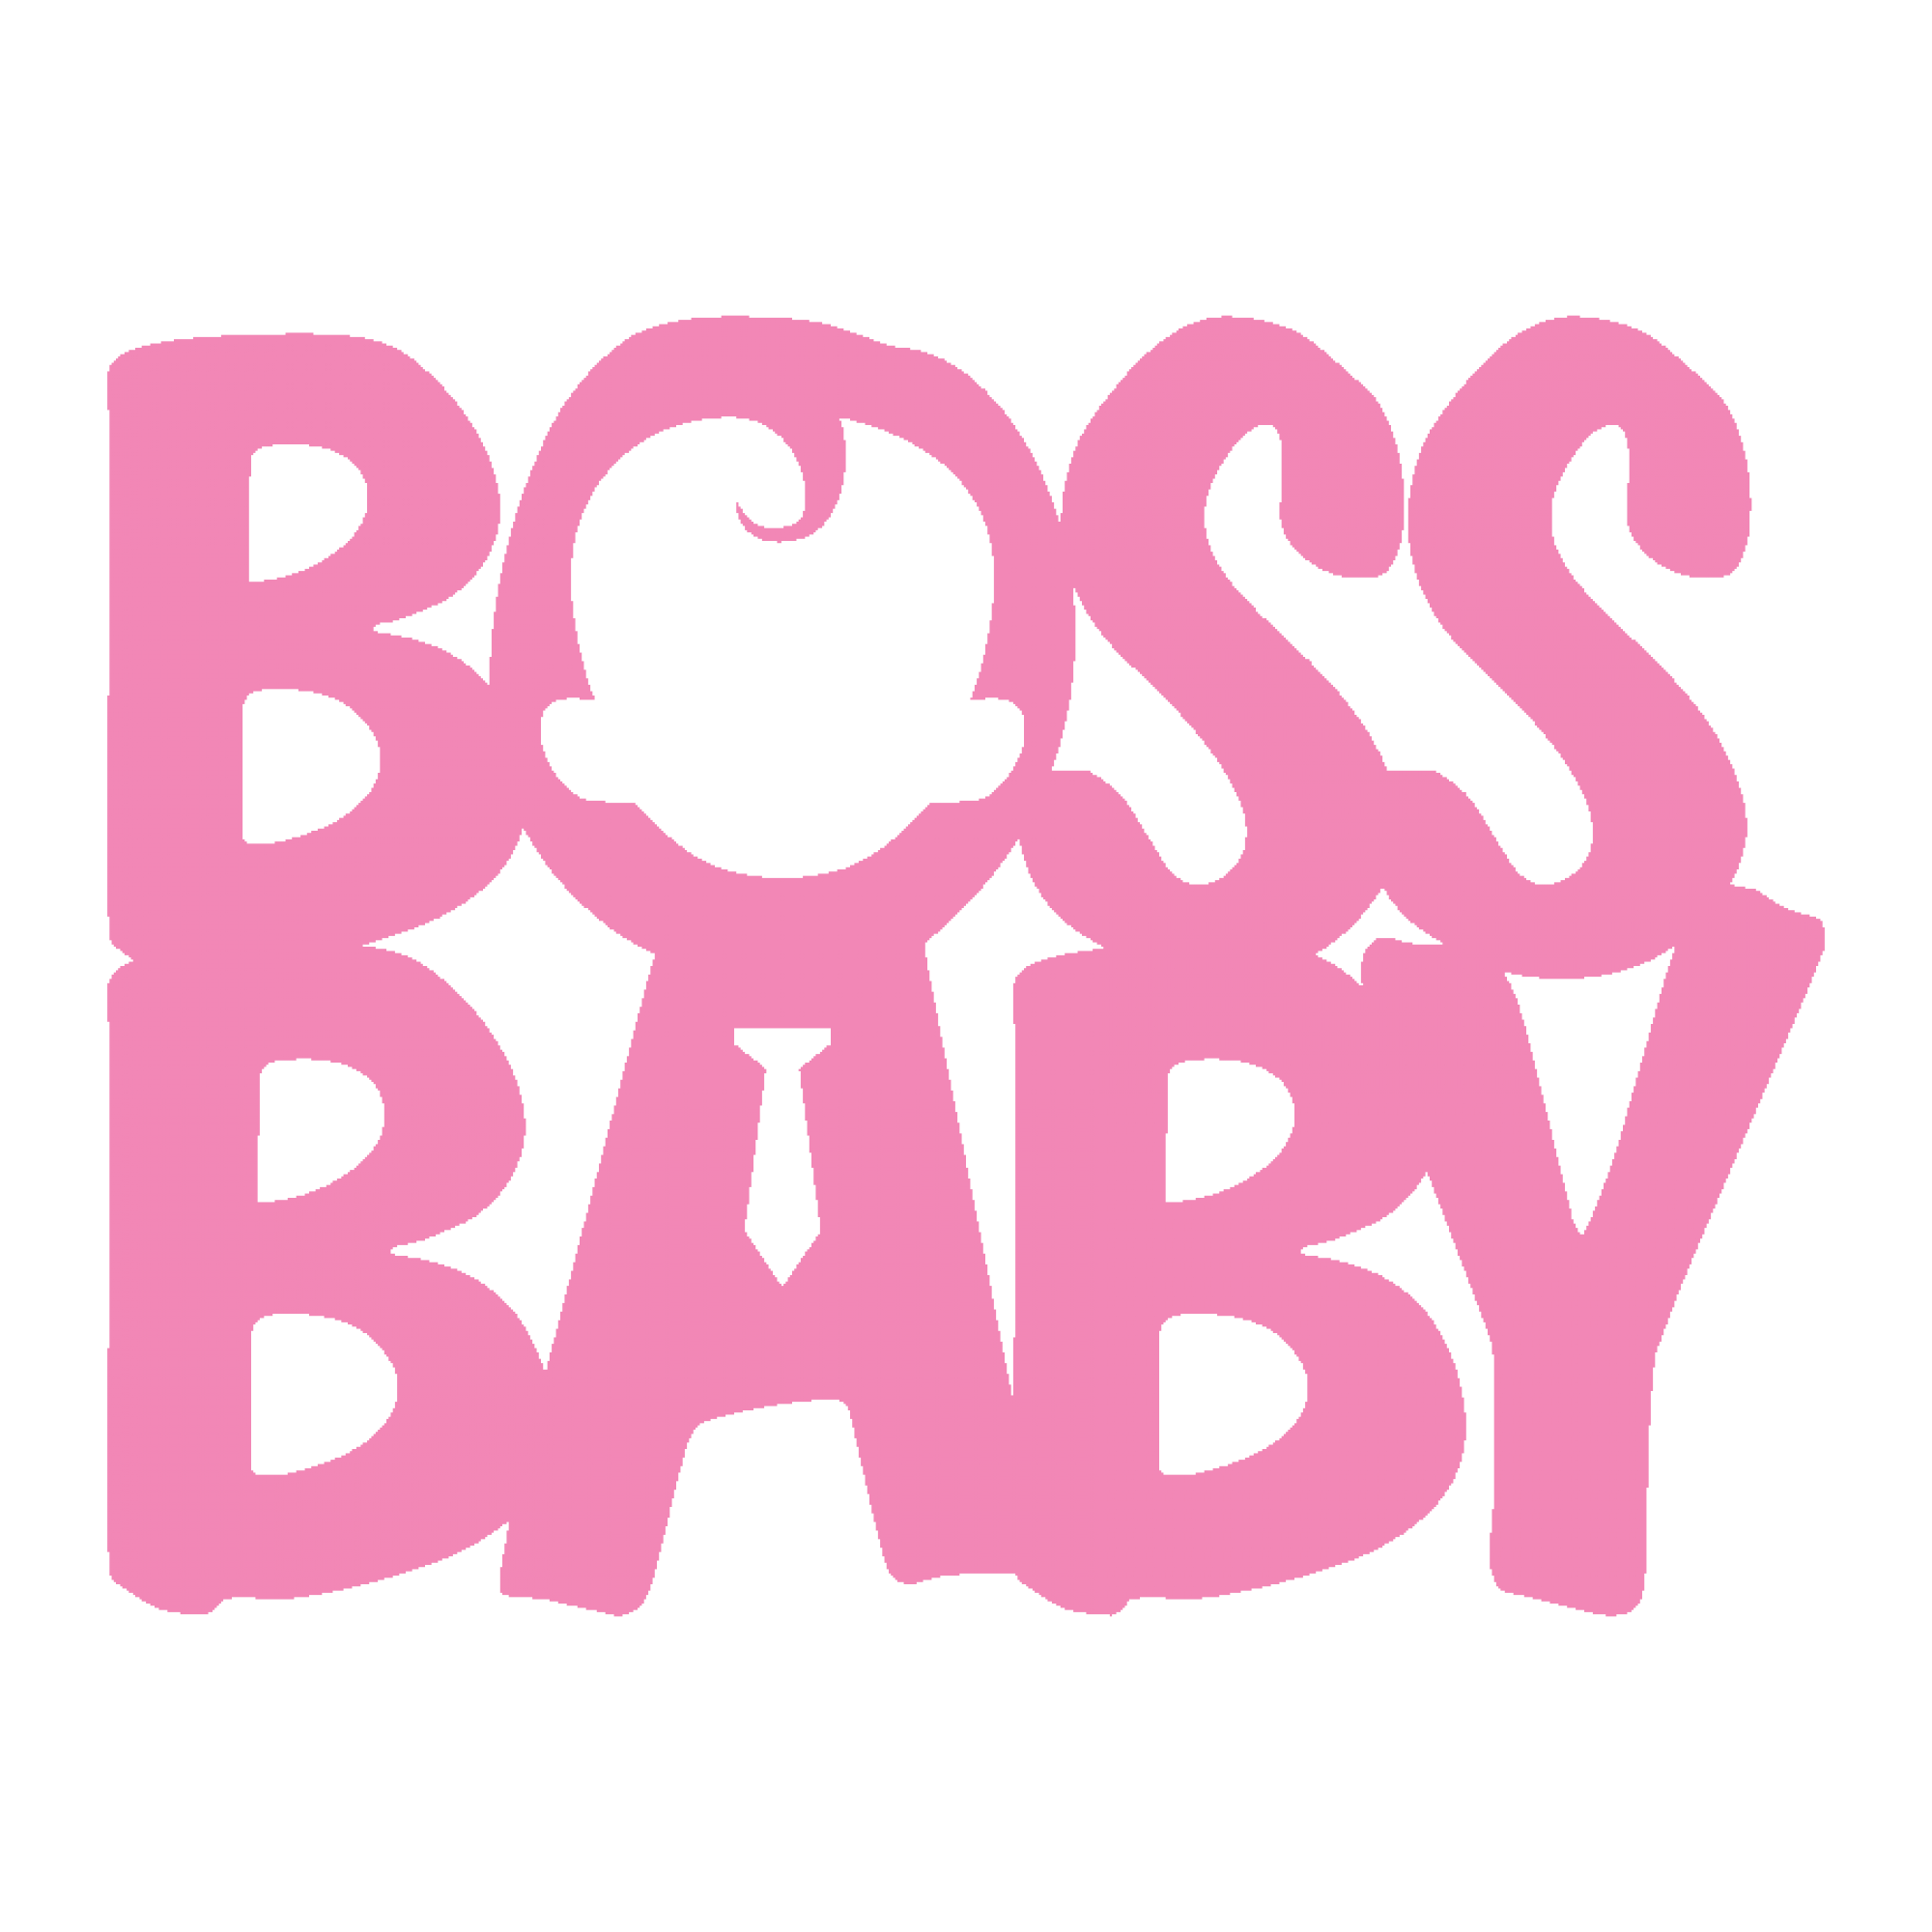 Boss Baby Pink Logo Png You Will Receive Png Images Of The Exact ...